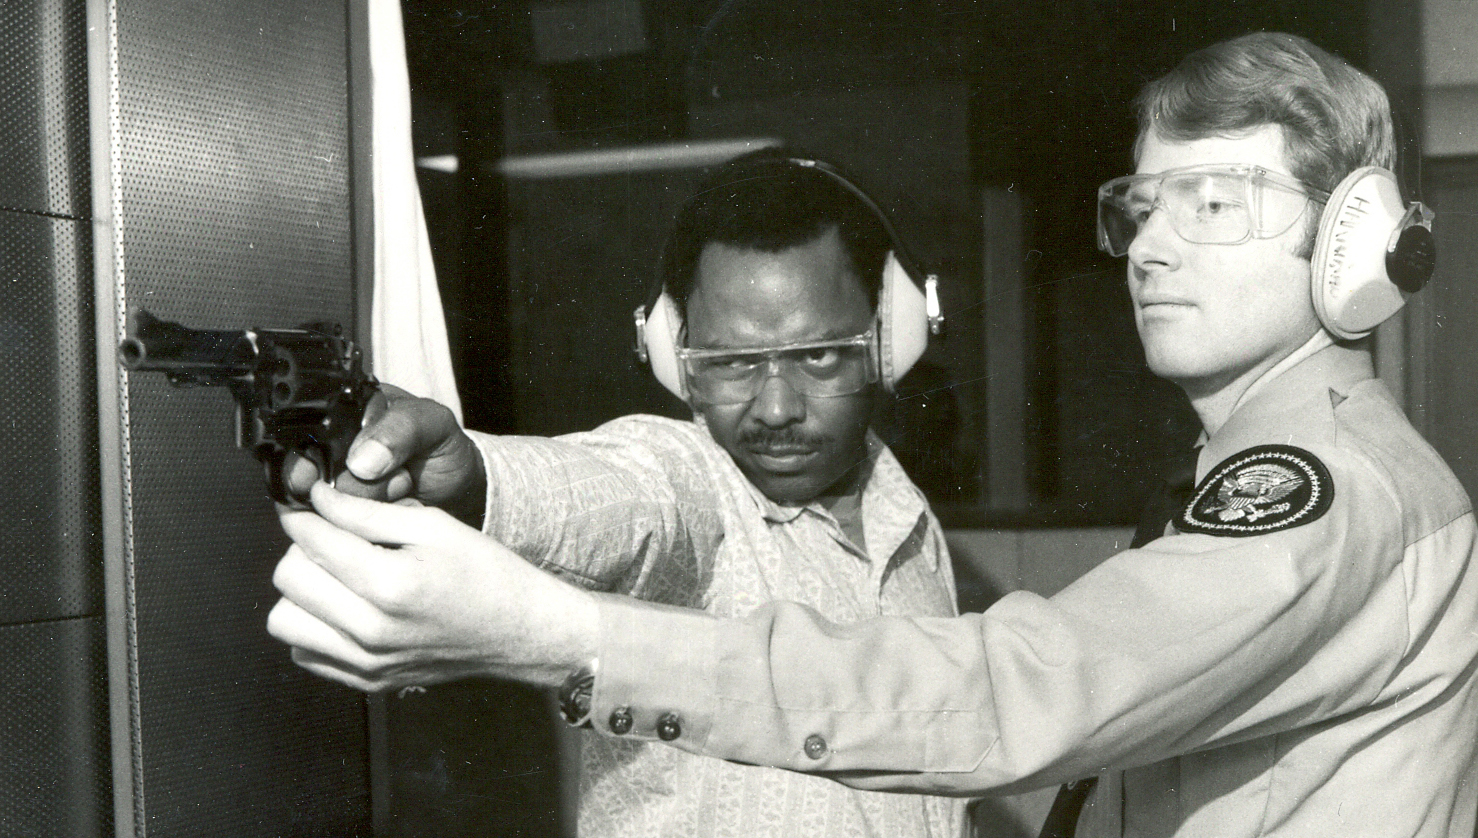 An instructor assists a student with firearms training in the 1970s.